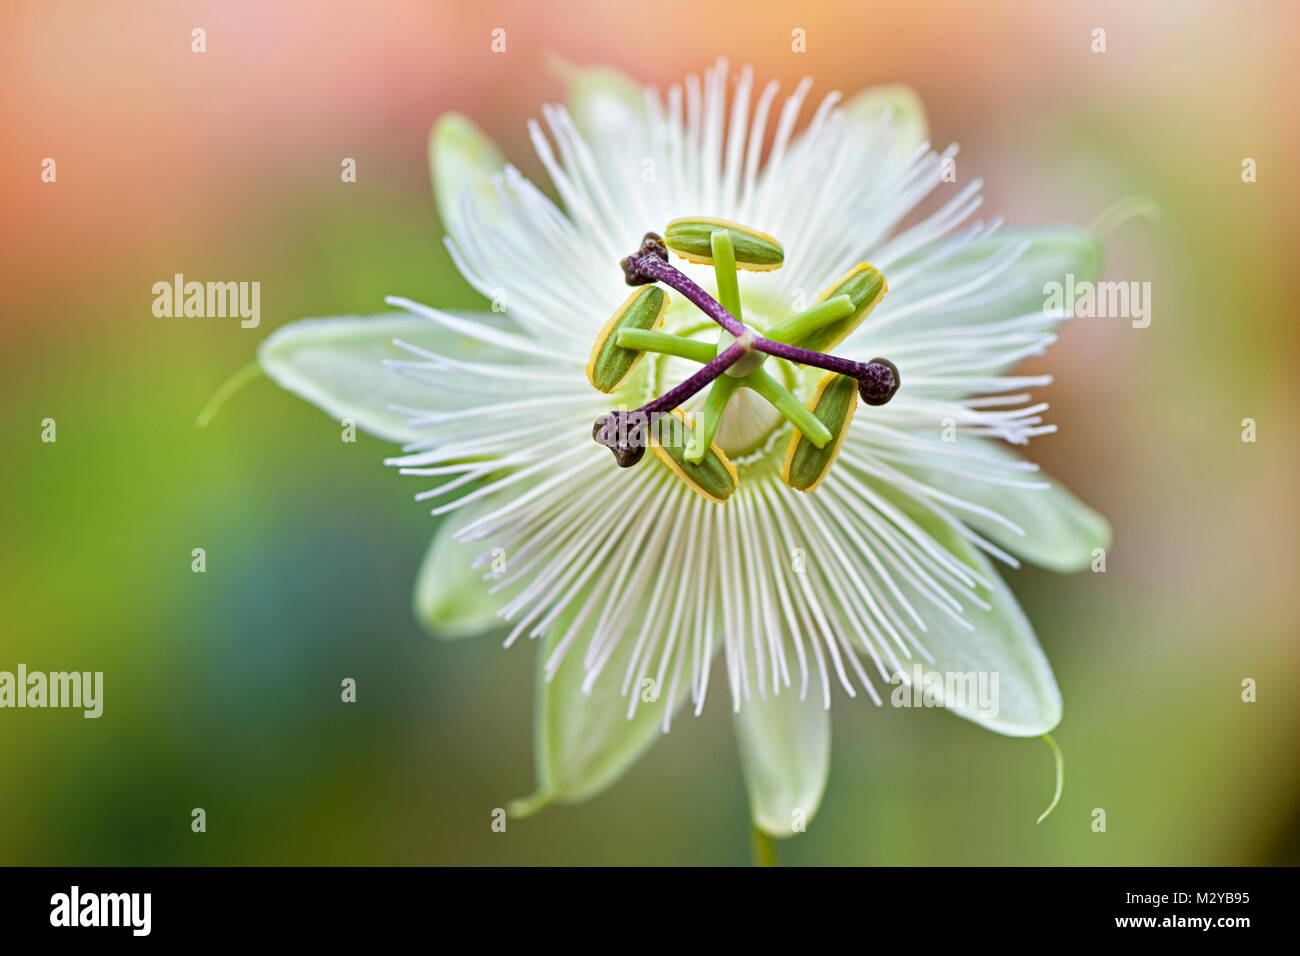 Close-up image of the summer flowering Passion Flower Constance Elliot - Passiflora against a soft backfound Stock Photo